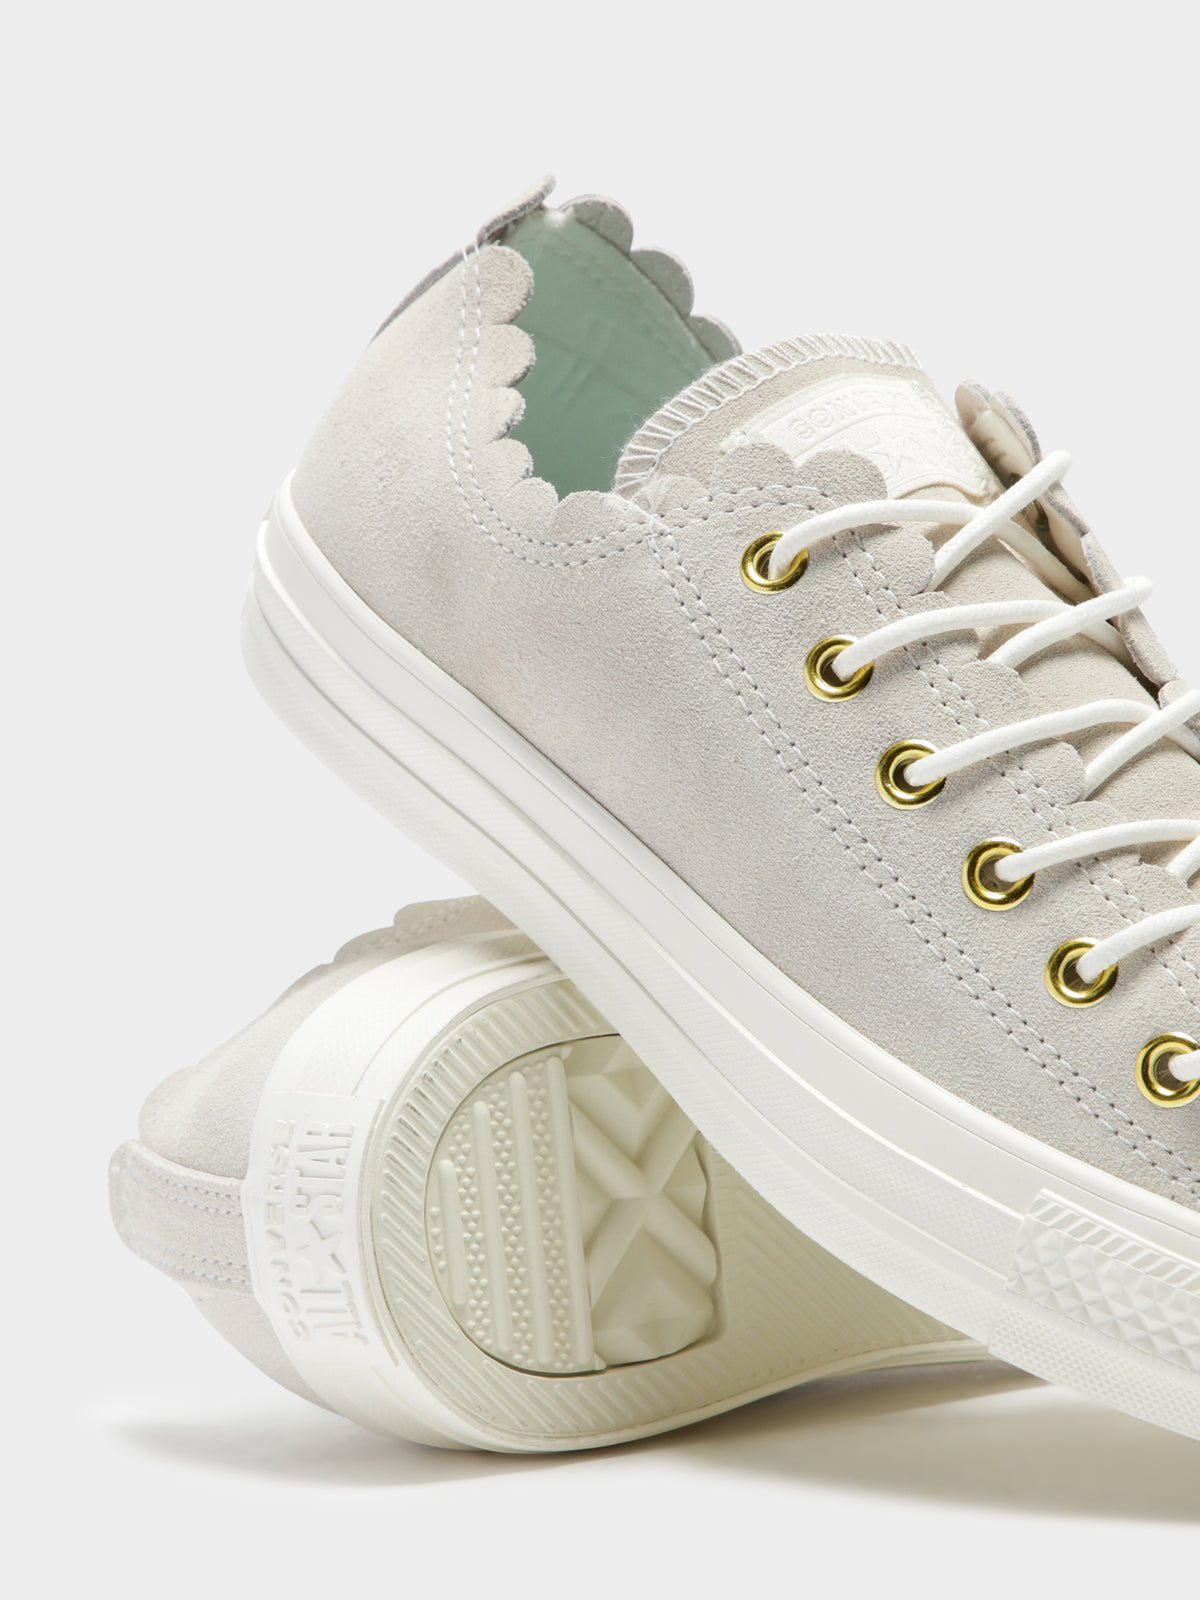 Womens Chuck Taylor All Star Frilly Thrills Sneakers in Egret